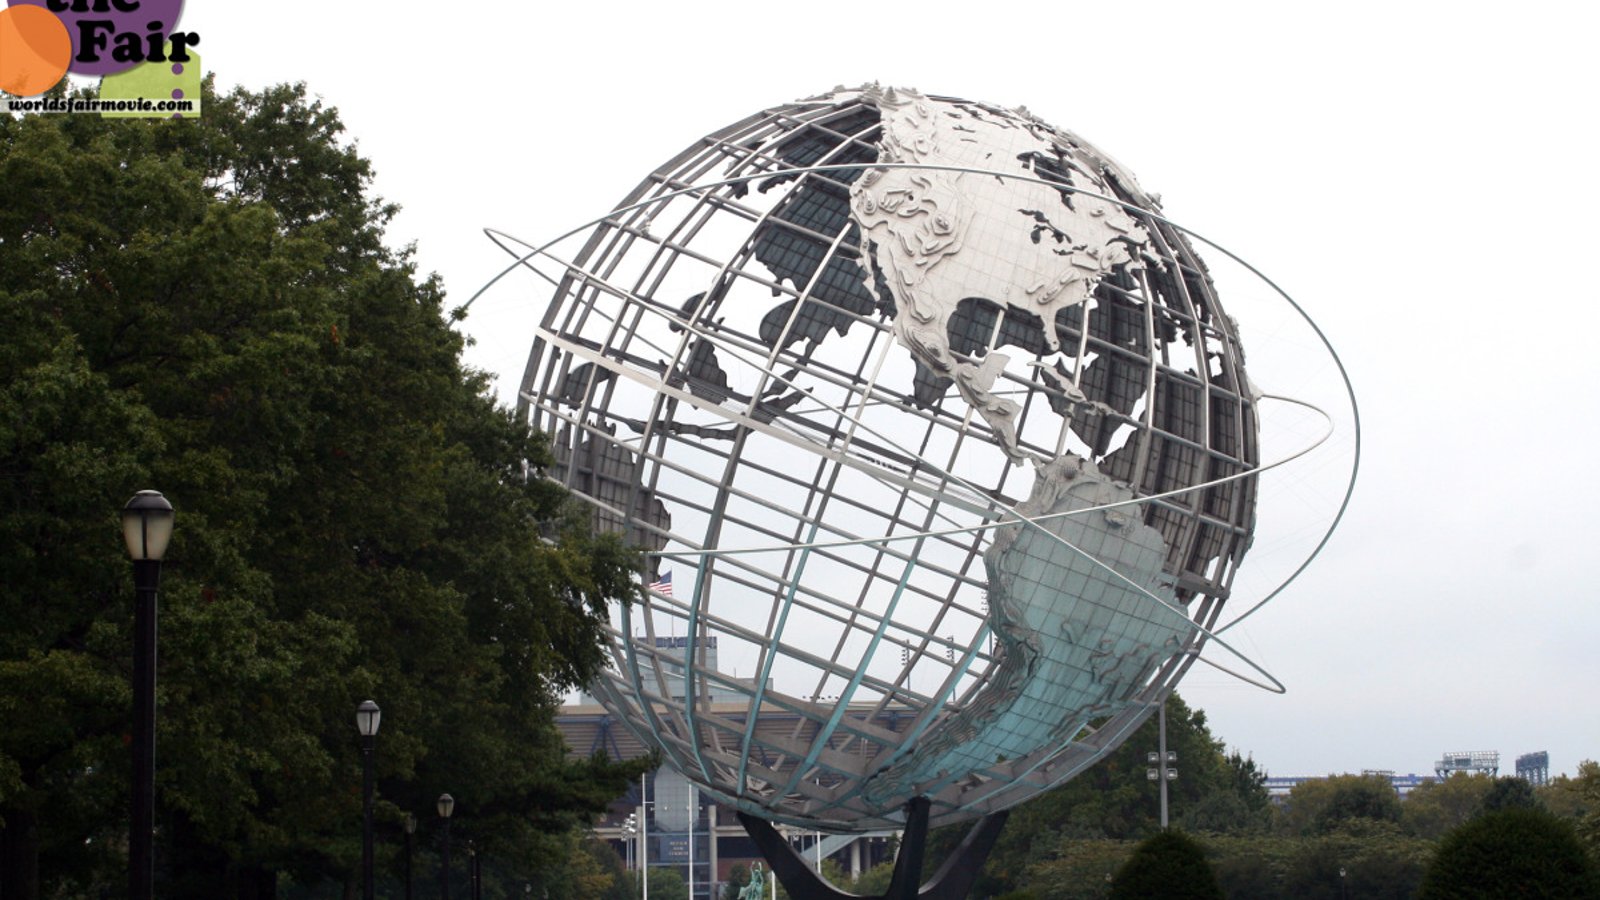 After The Fair - The Legacy of the 1964 World's Fair